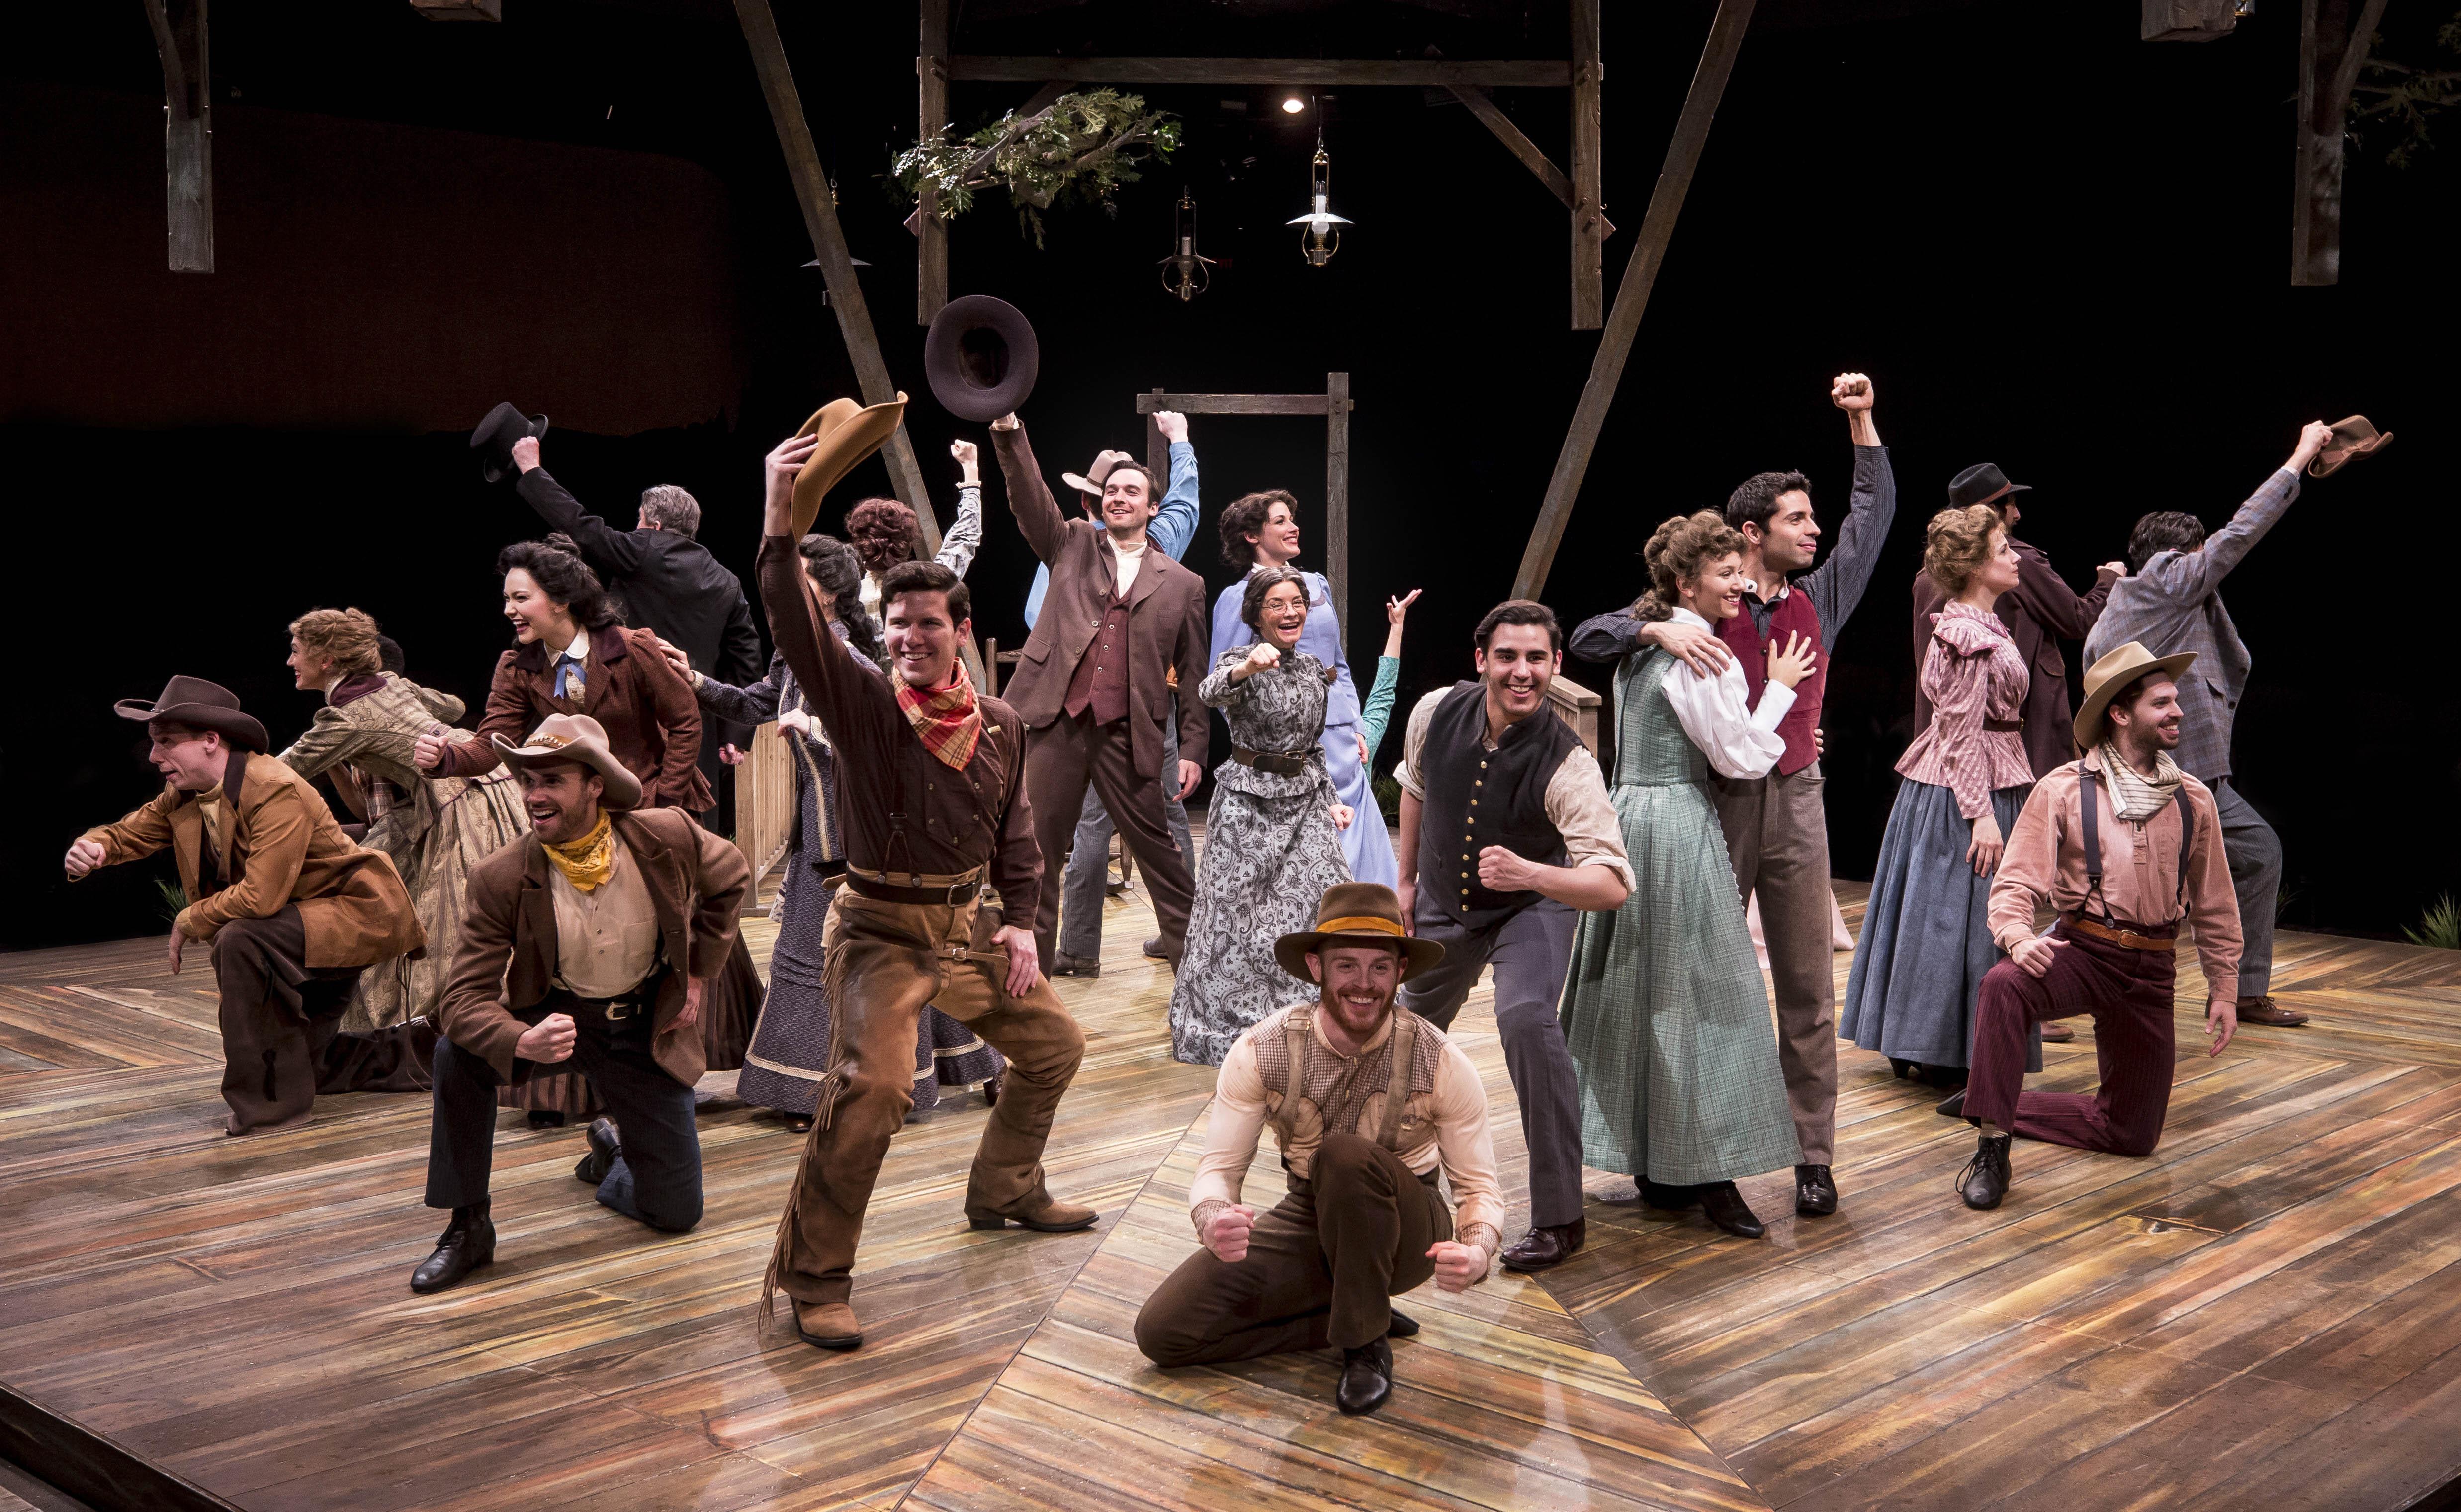 The cast of “Oklahoma!” at Marriott Theatre in Lincolnshire. (Photo by Liz Lauren) 